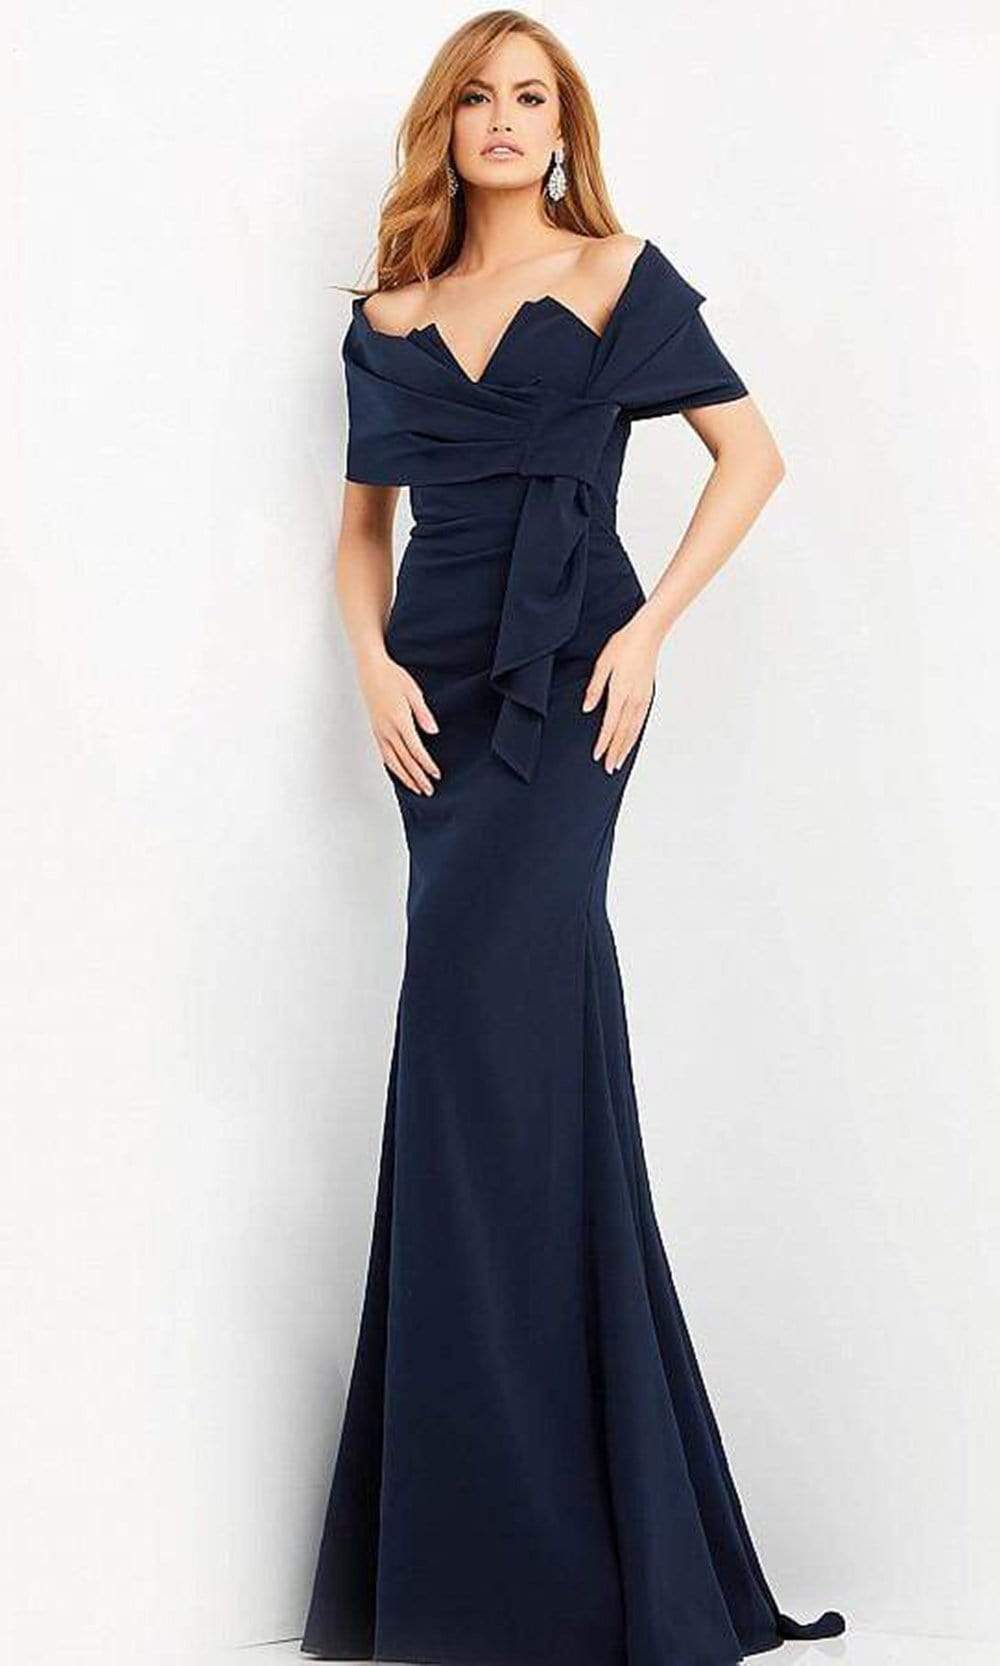 Jovani - 06403 Sweetheart Ruched Sheath Dress with Shawl Evening Dresses 00 / Navy